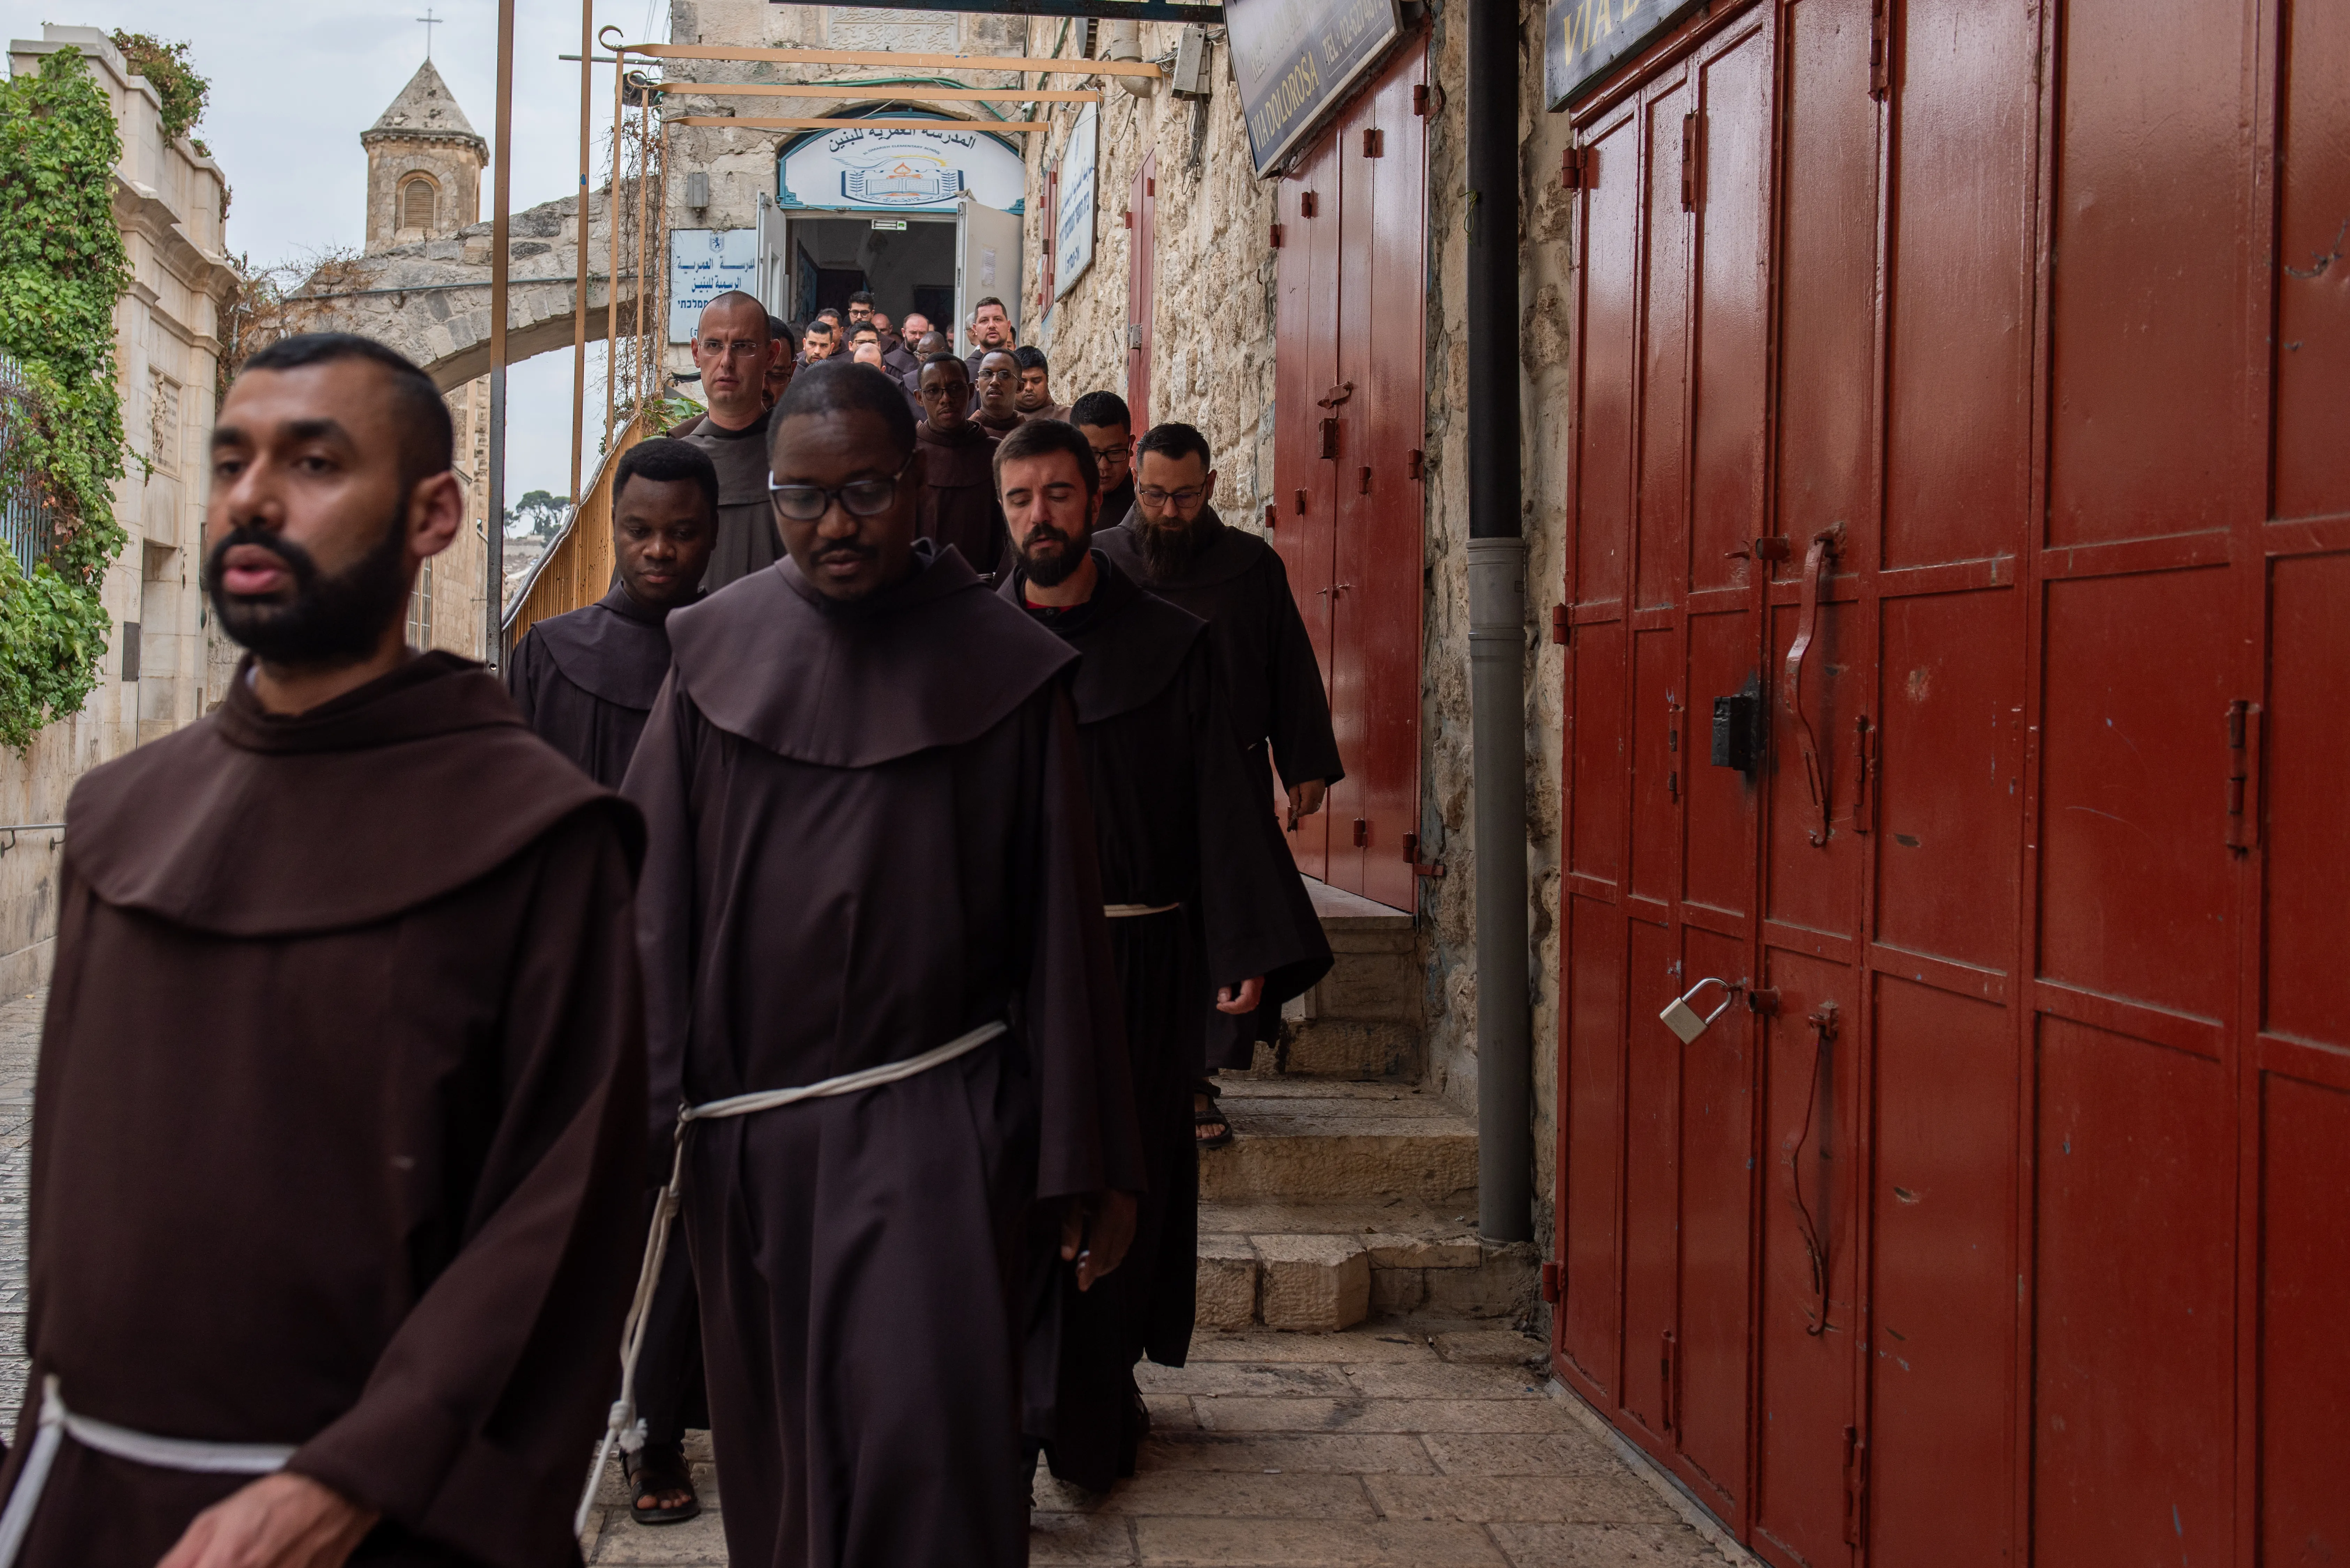 Friars walking along the Via Dolorosa on Friday, Oct. 27, 2023. After two weeks, the Franciscan friars of the Custody of the Holy Land returned to pray the Way of the Cross on the Via Dolorosa in Jerusalem.?w=200&h=150